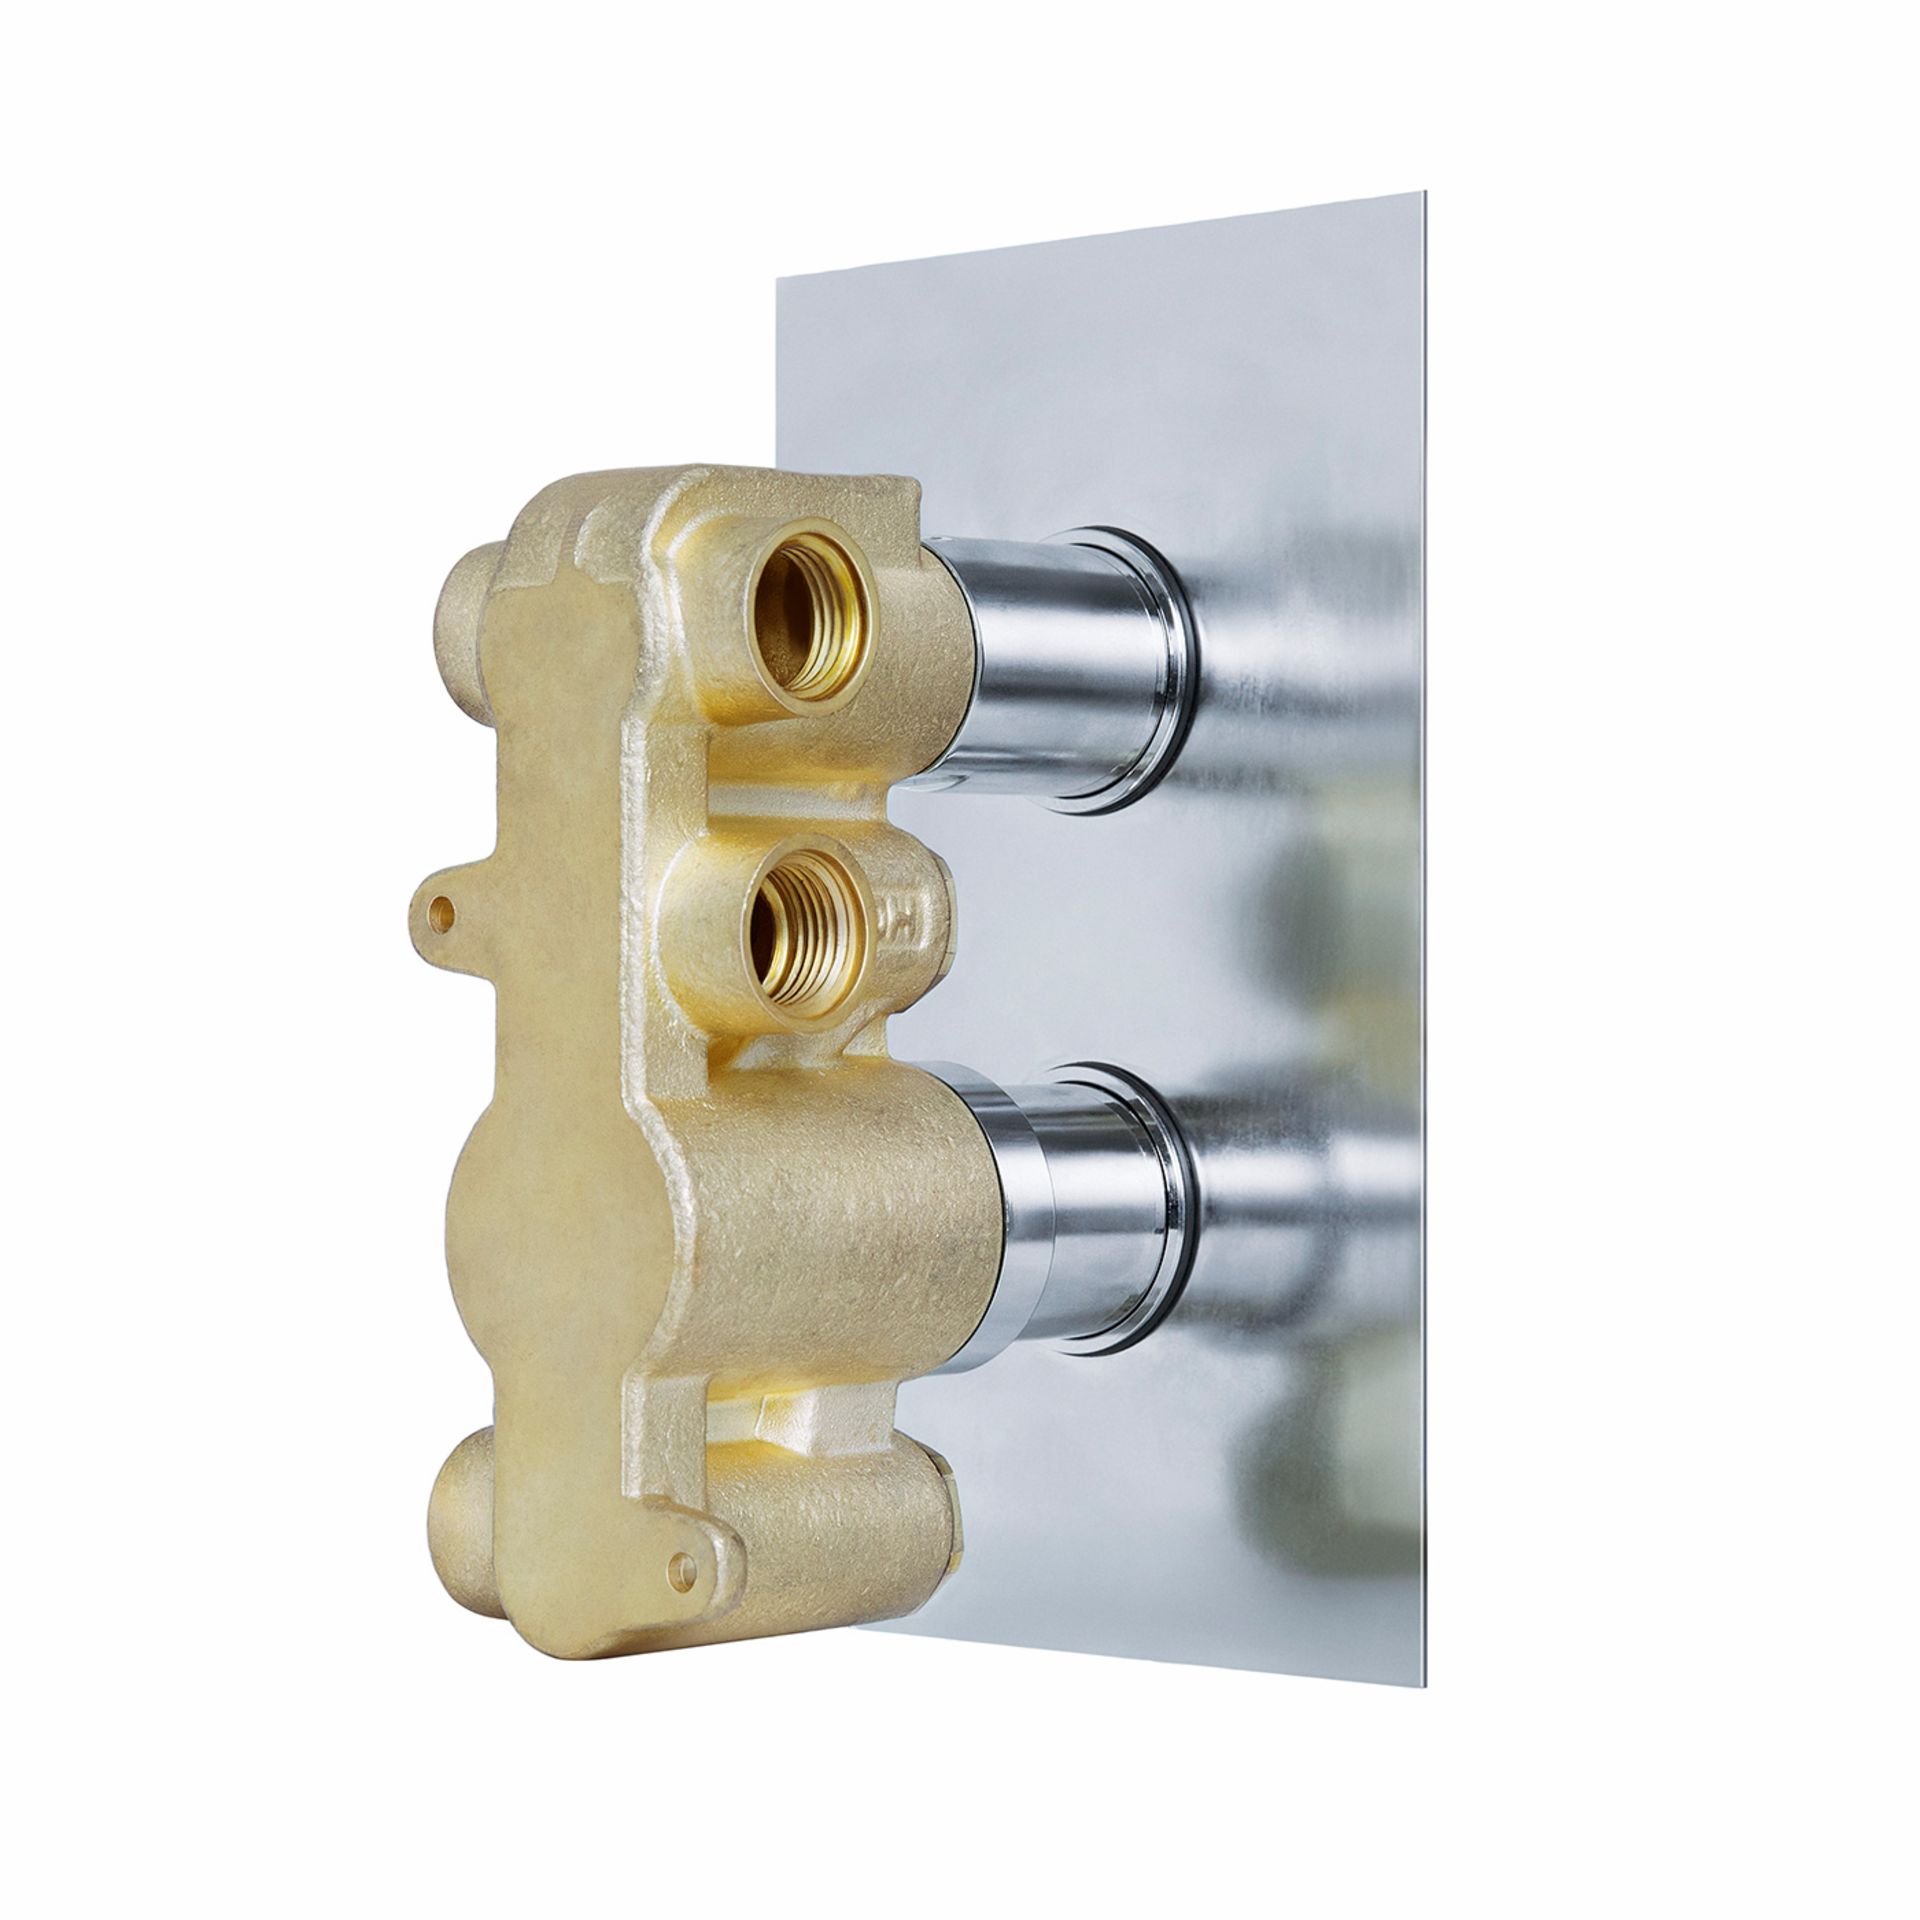 (J136) Round Two Way Concealed Valve. RRP £299.99. Chrome plated solid brass Built in anti- - Image 2 of 2